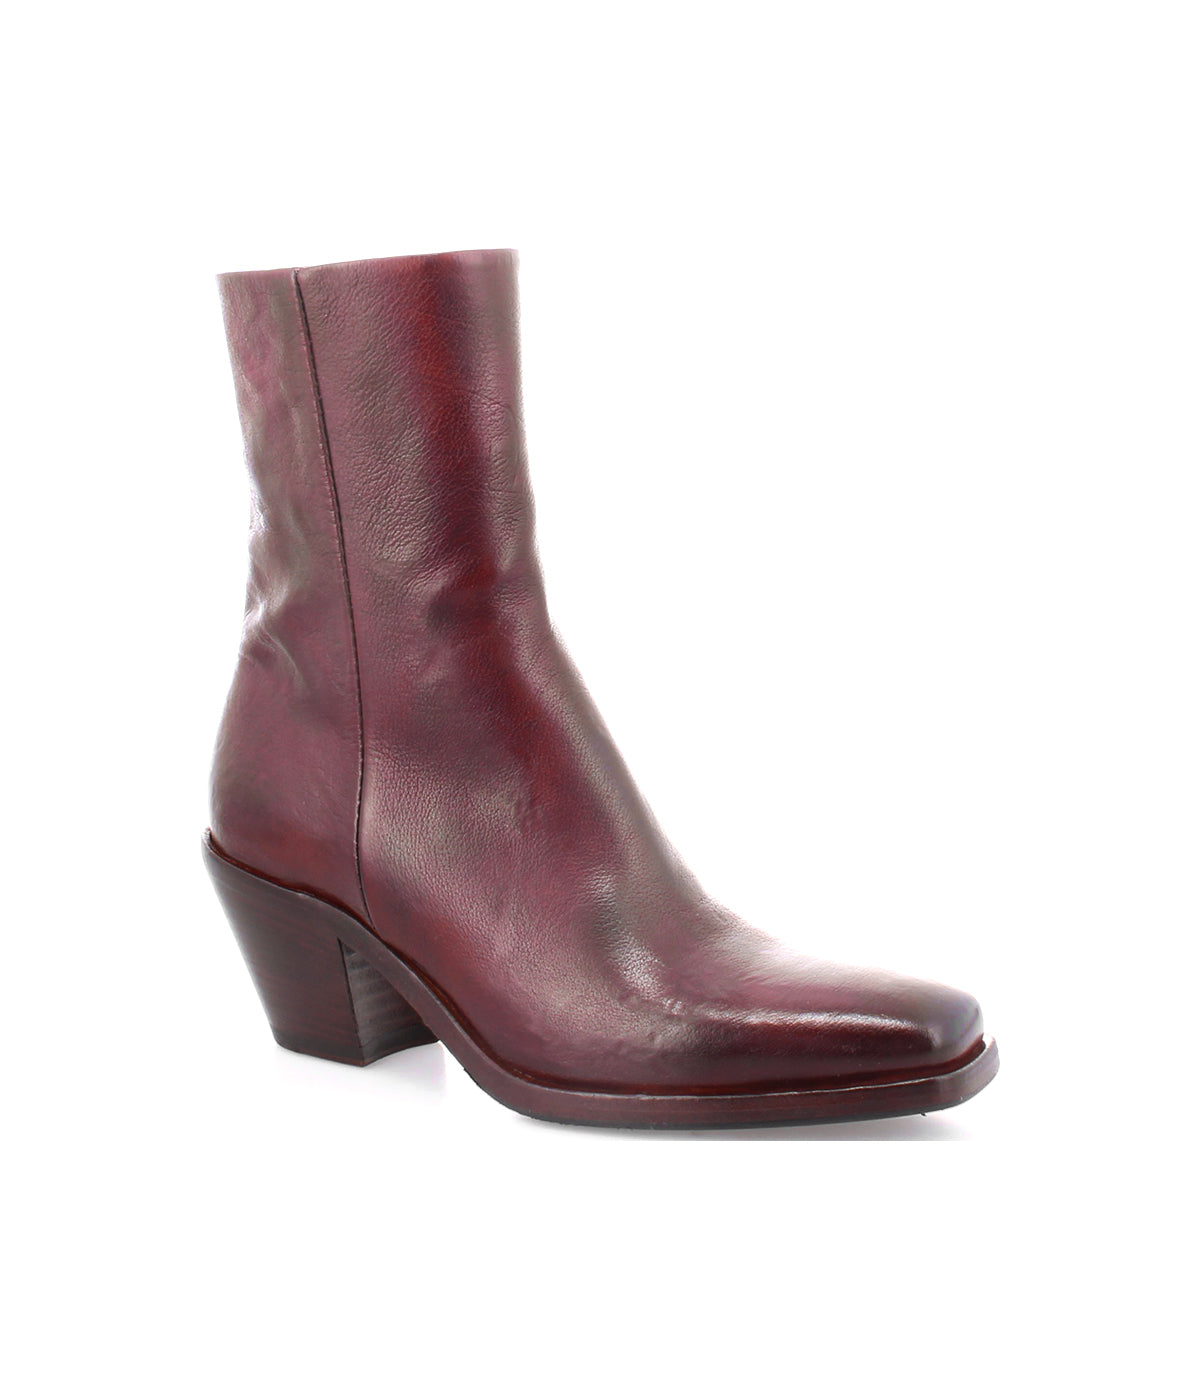 A women's Vendue ankle boot in burgundy leather with a sleek silhouette on a white background by Bed Stu.